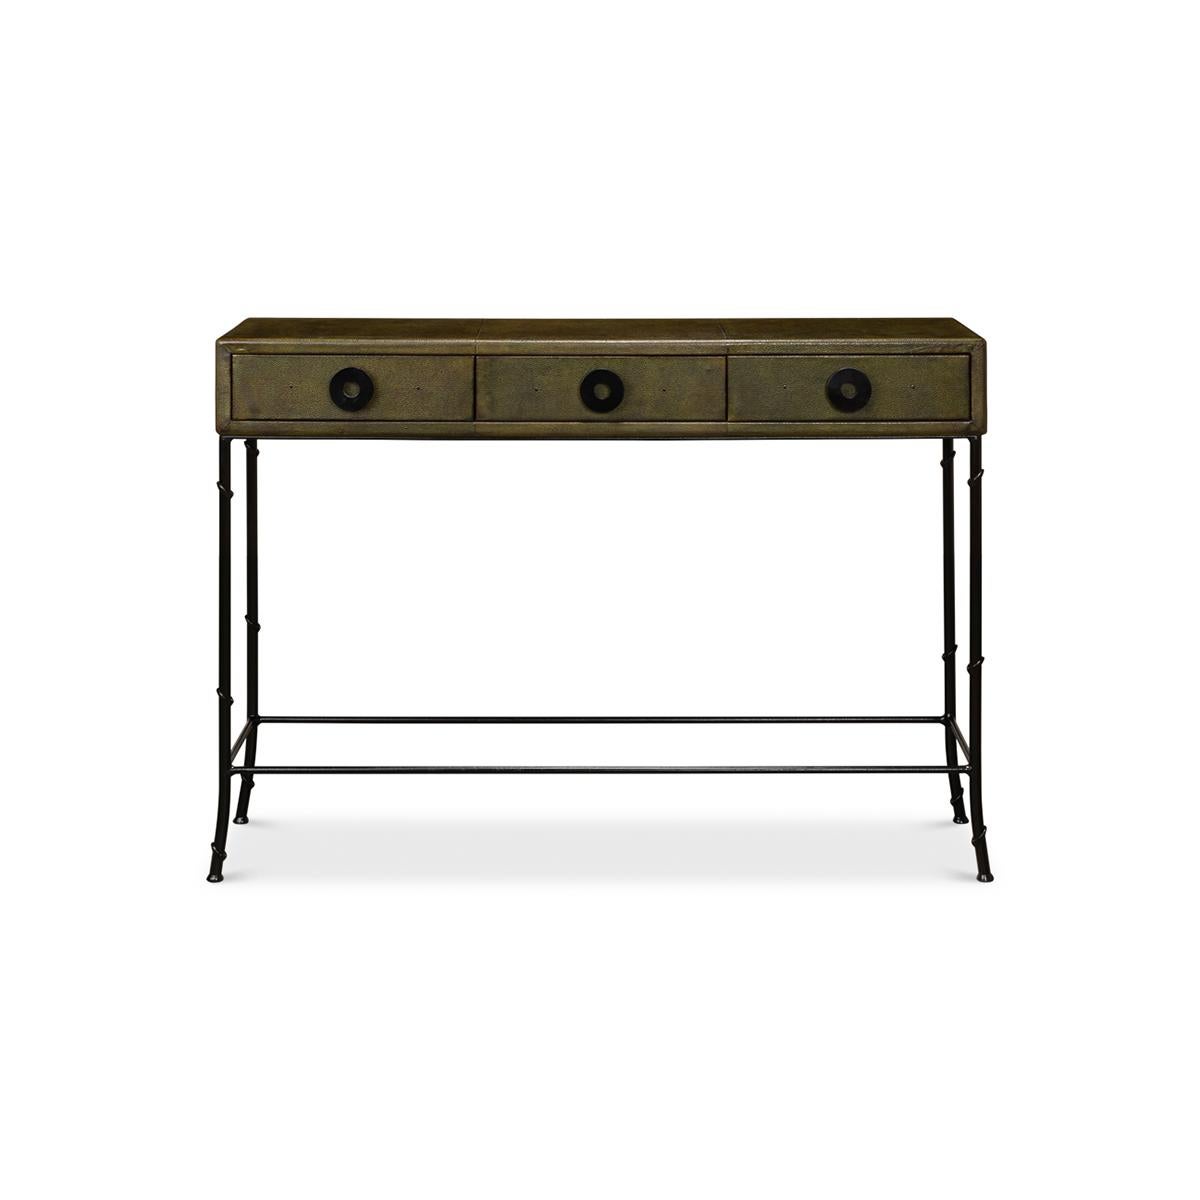 Dark Green Leather Wrapped Console Table. With its stunning faux shagreen embossed green leather wrap adorning the upper section, this piece is the perfect blend of sophistication and practicality. The three lined frieze drawers, with bold circular